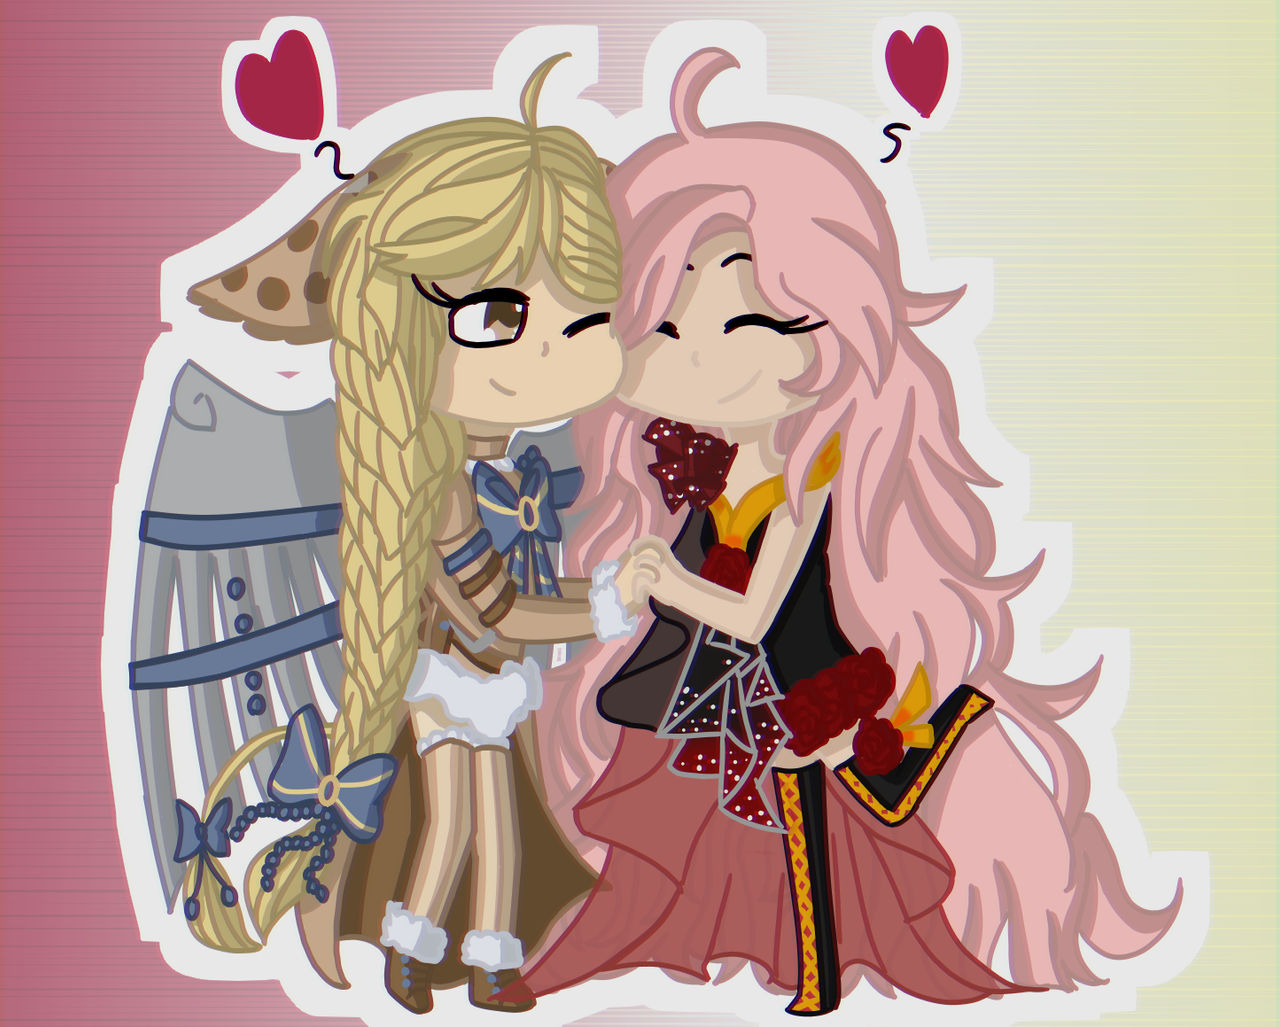 chibi_couple_by_psycho_pupg_ddsx7kf-full